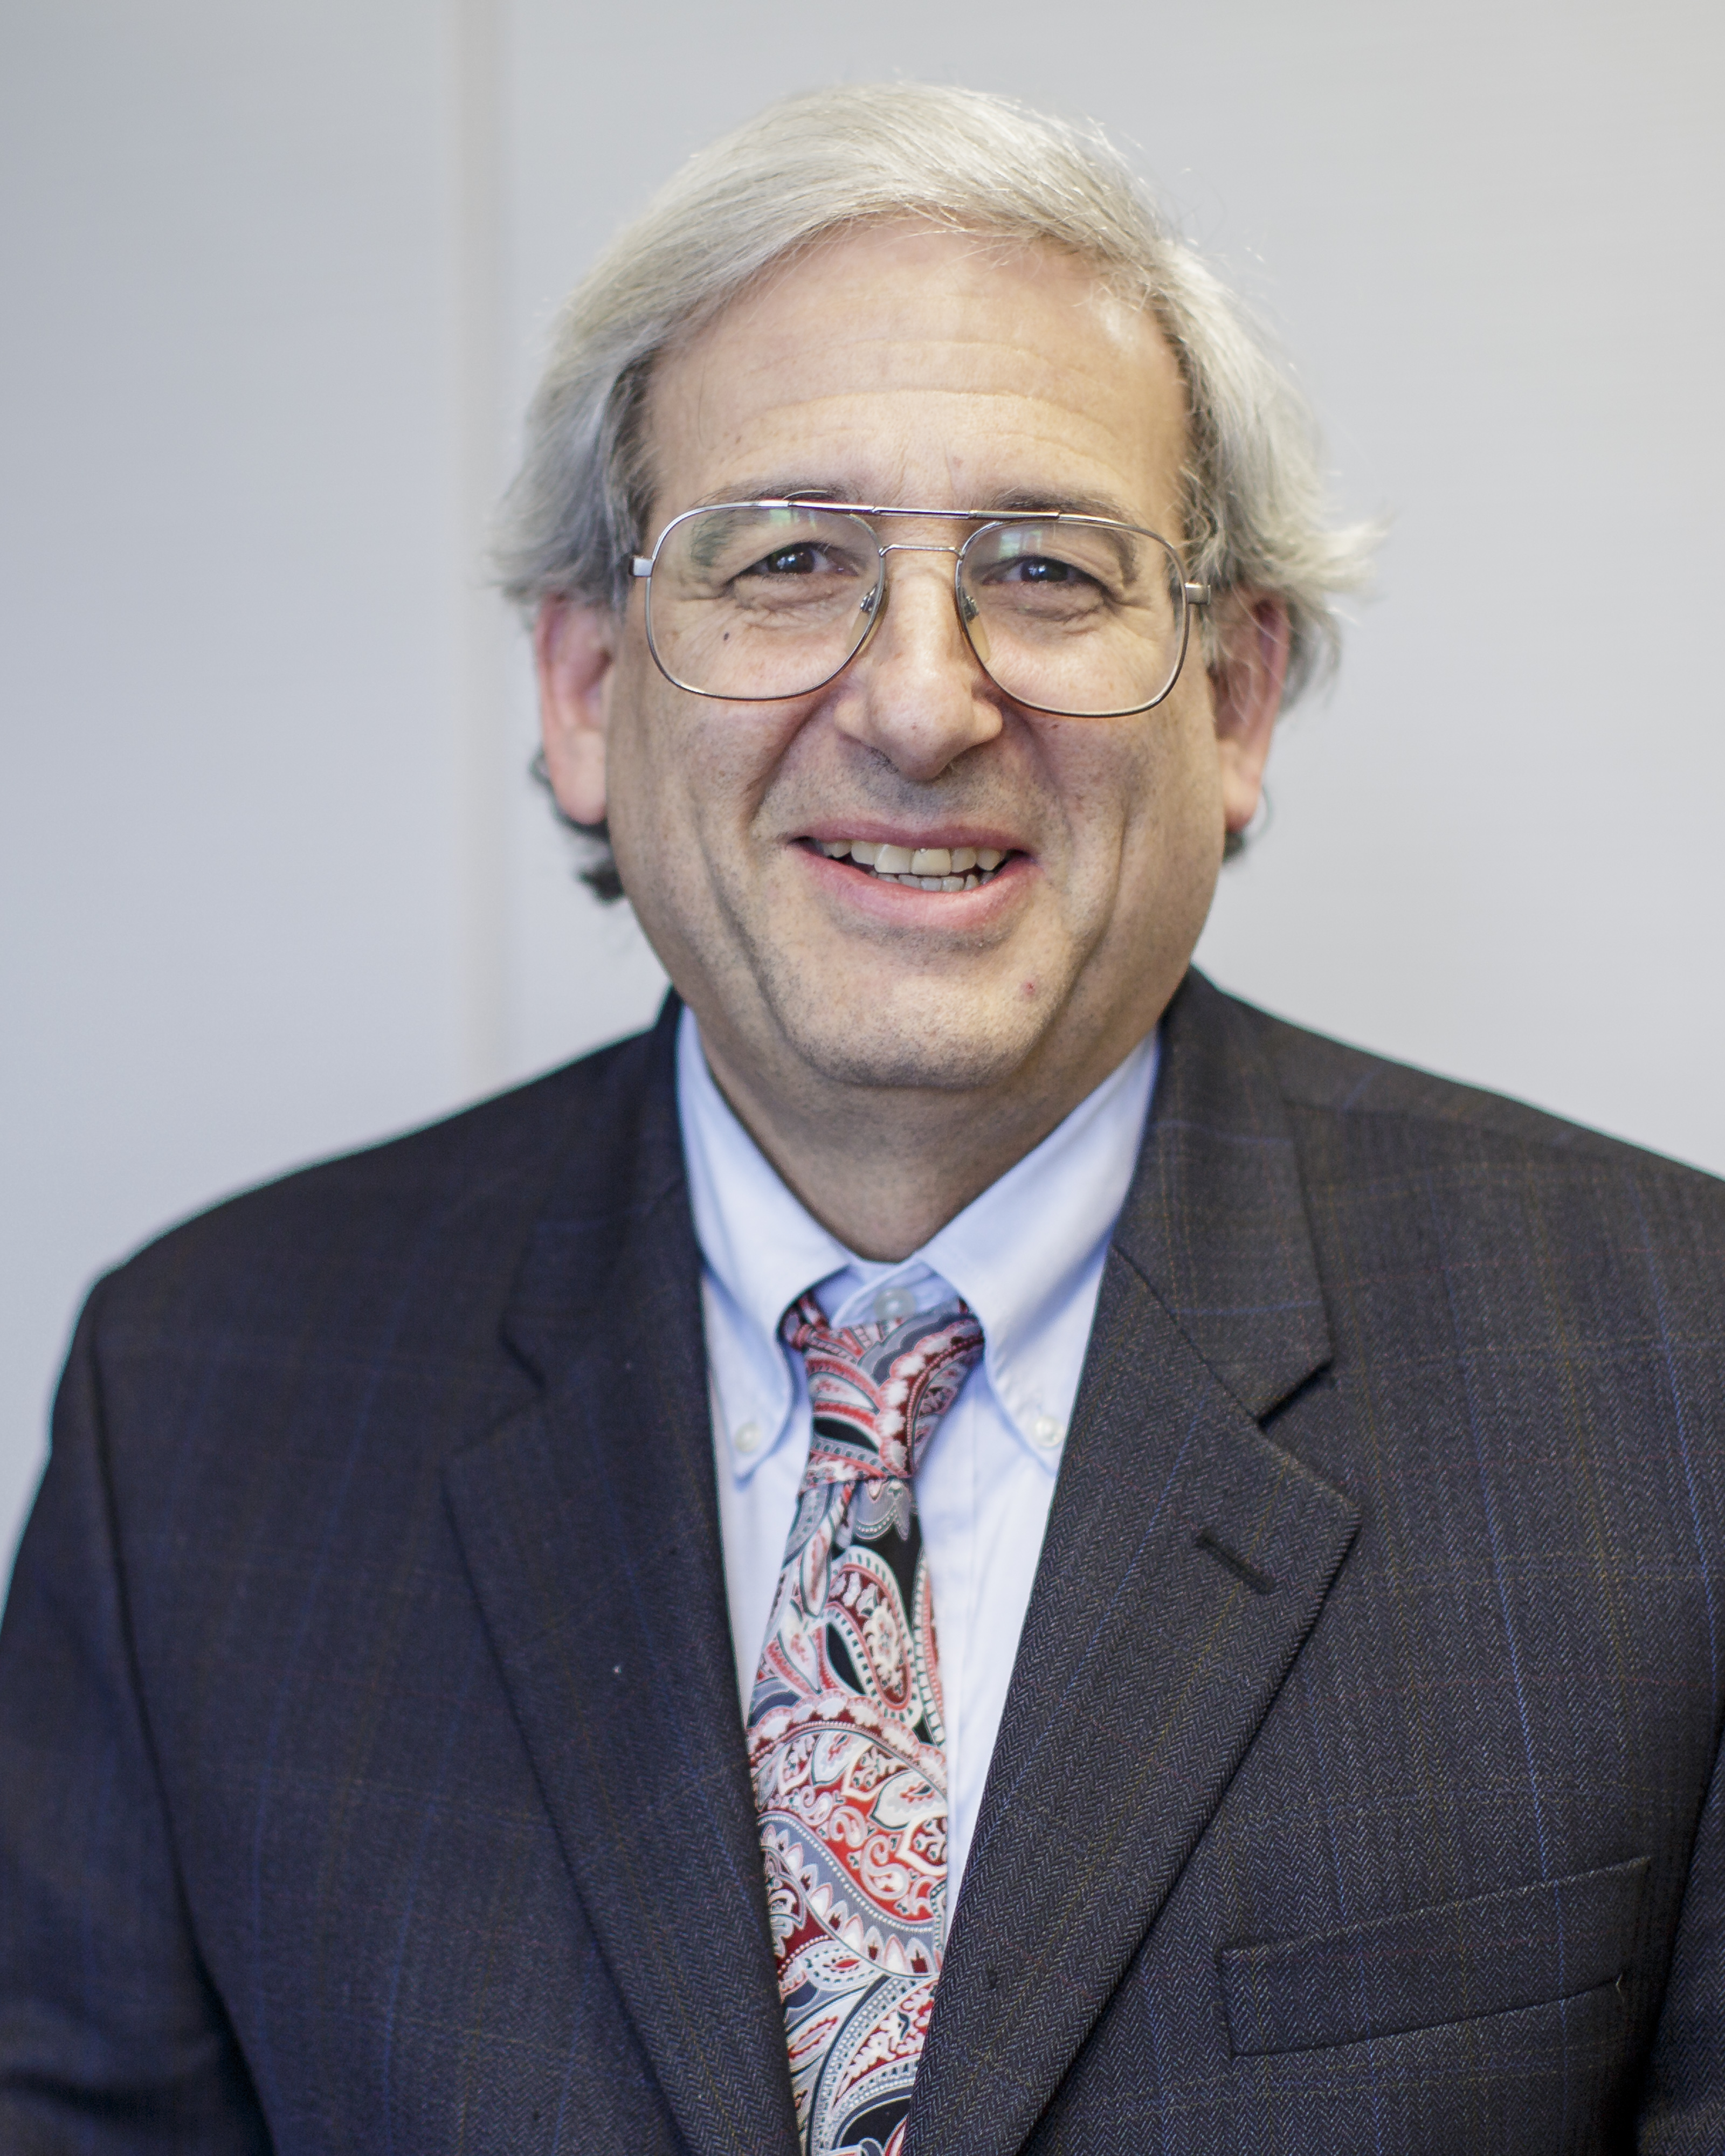 Michael Freilich, who served as director of NASA’s Earth Science division from 2006-2019.